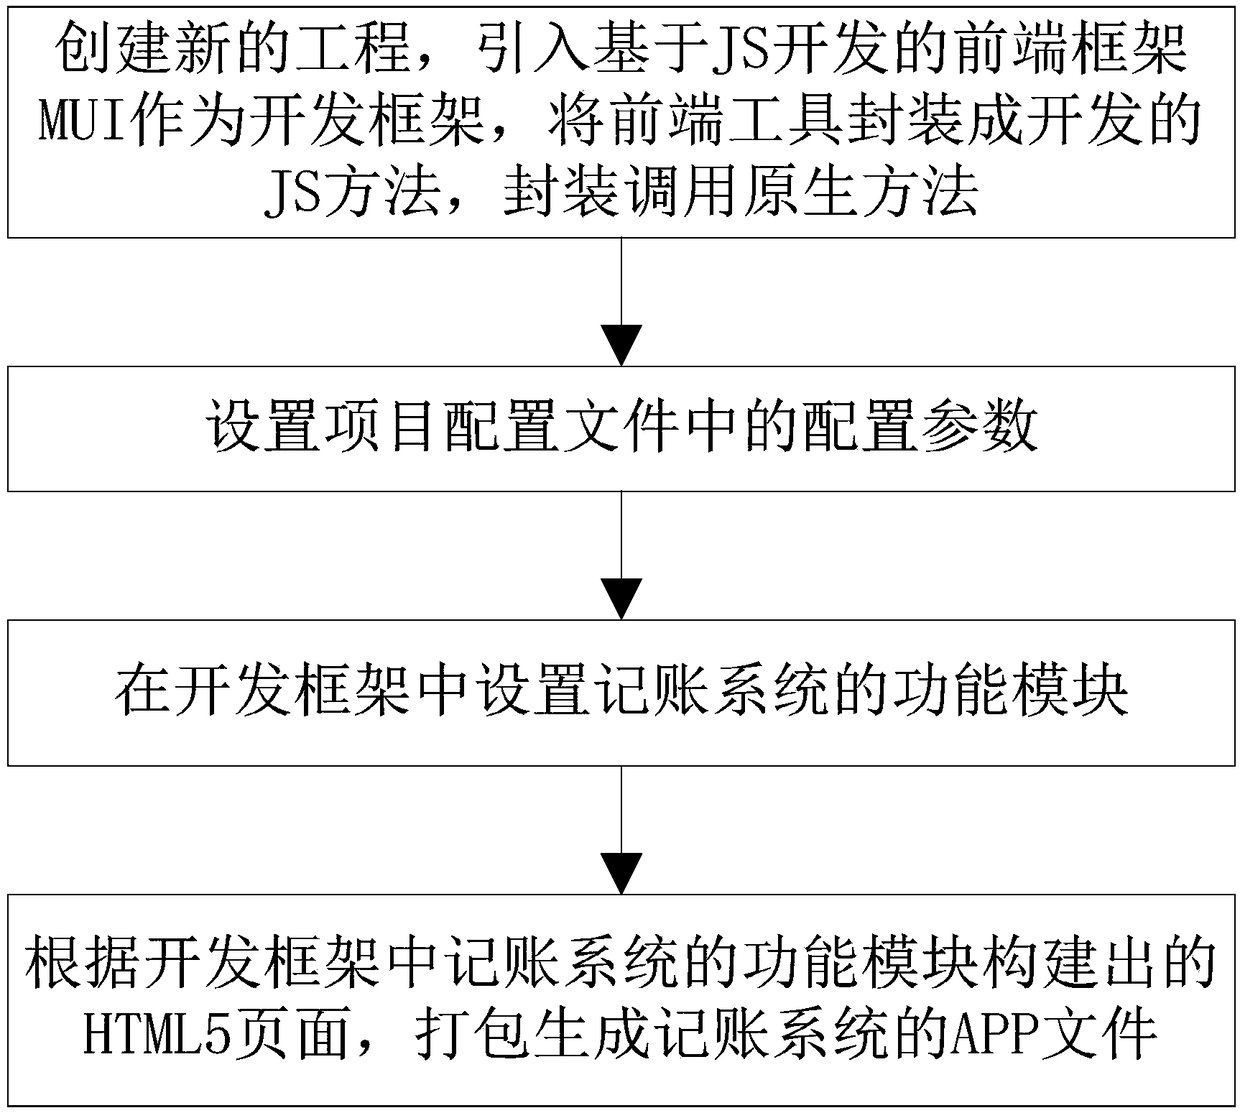 Method for creating artificial smartphone accounting system based on HTML5